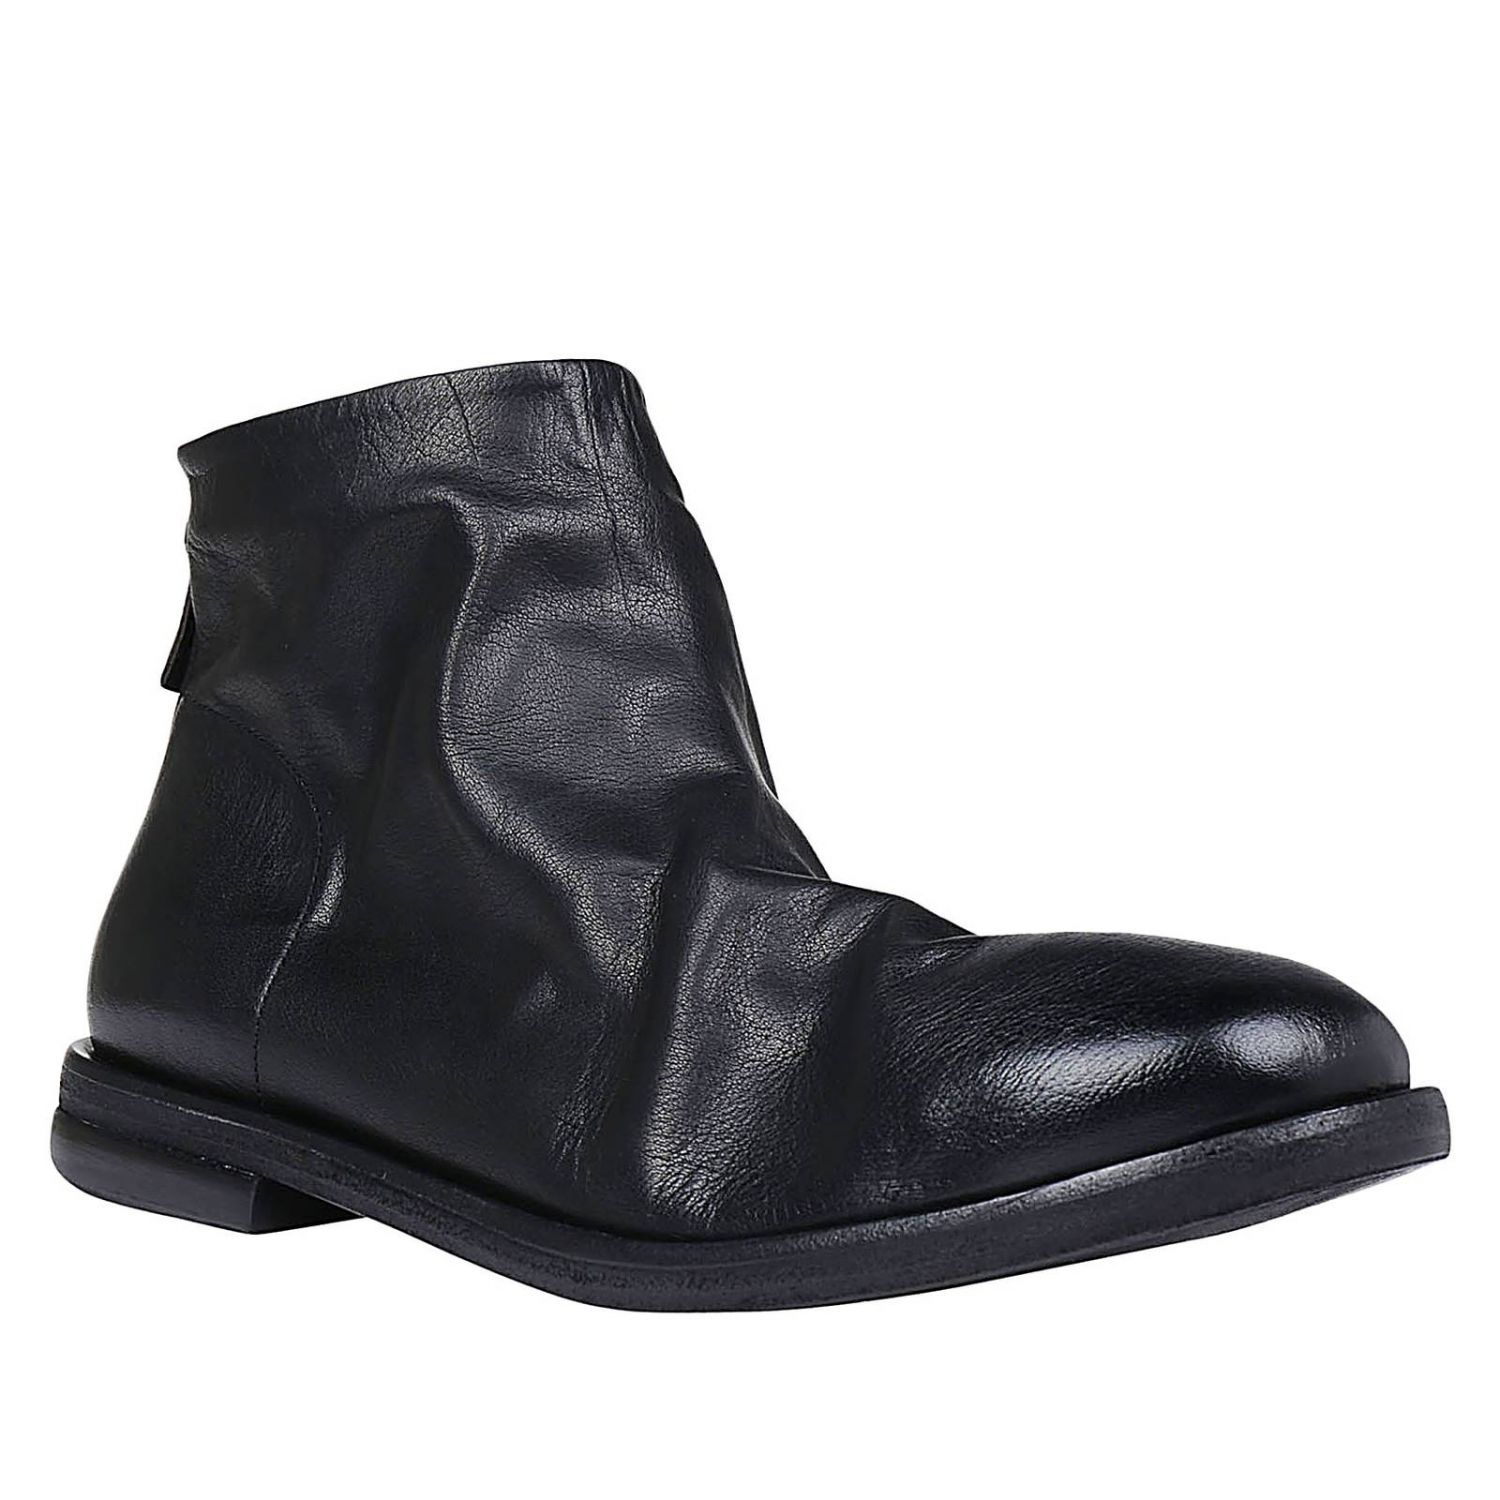 Marsèll Outlet: Boots men Marsell - Black | Boots Marsèll MM2663 GIGLIO.COM